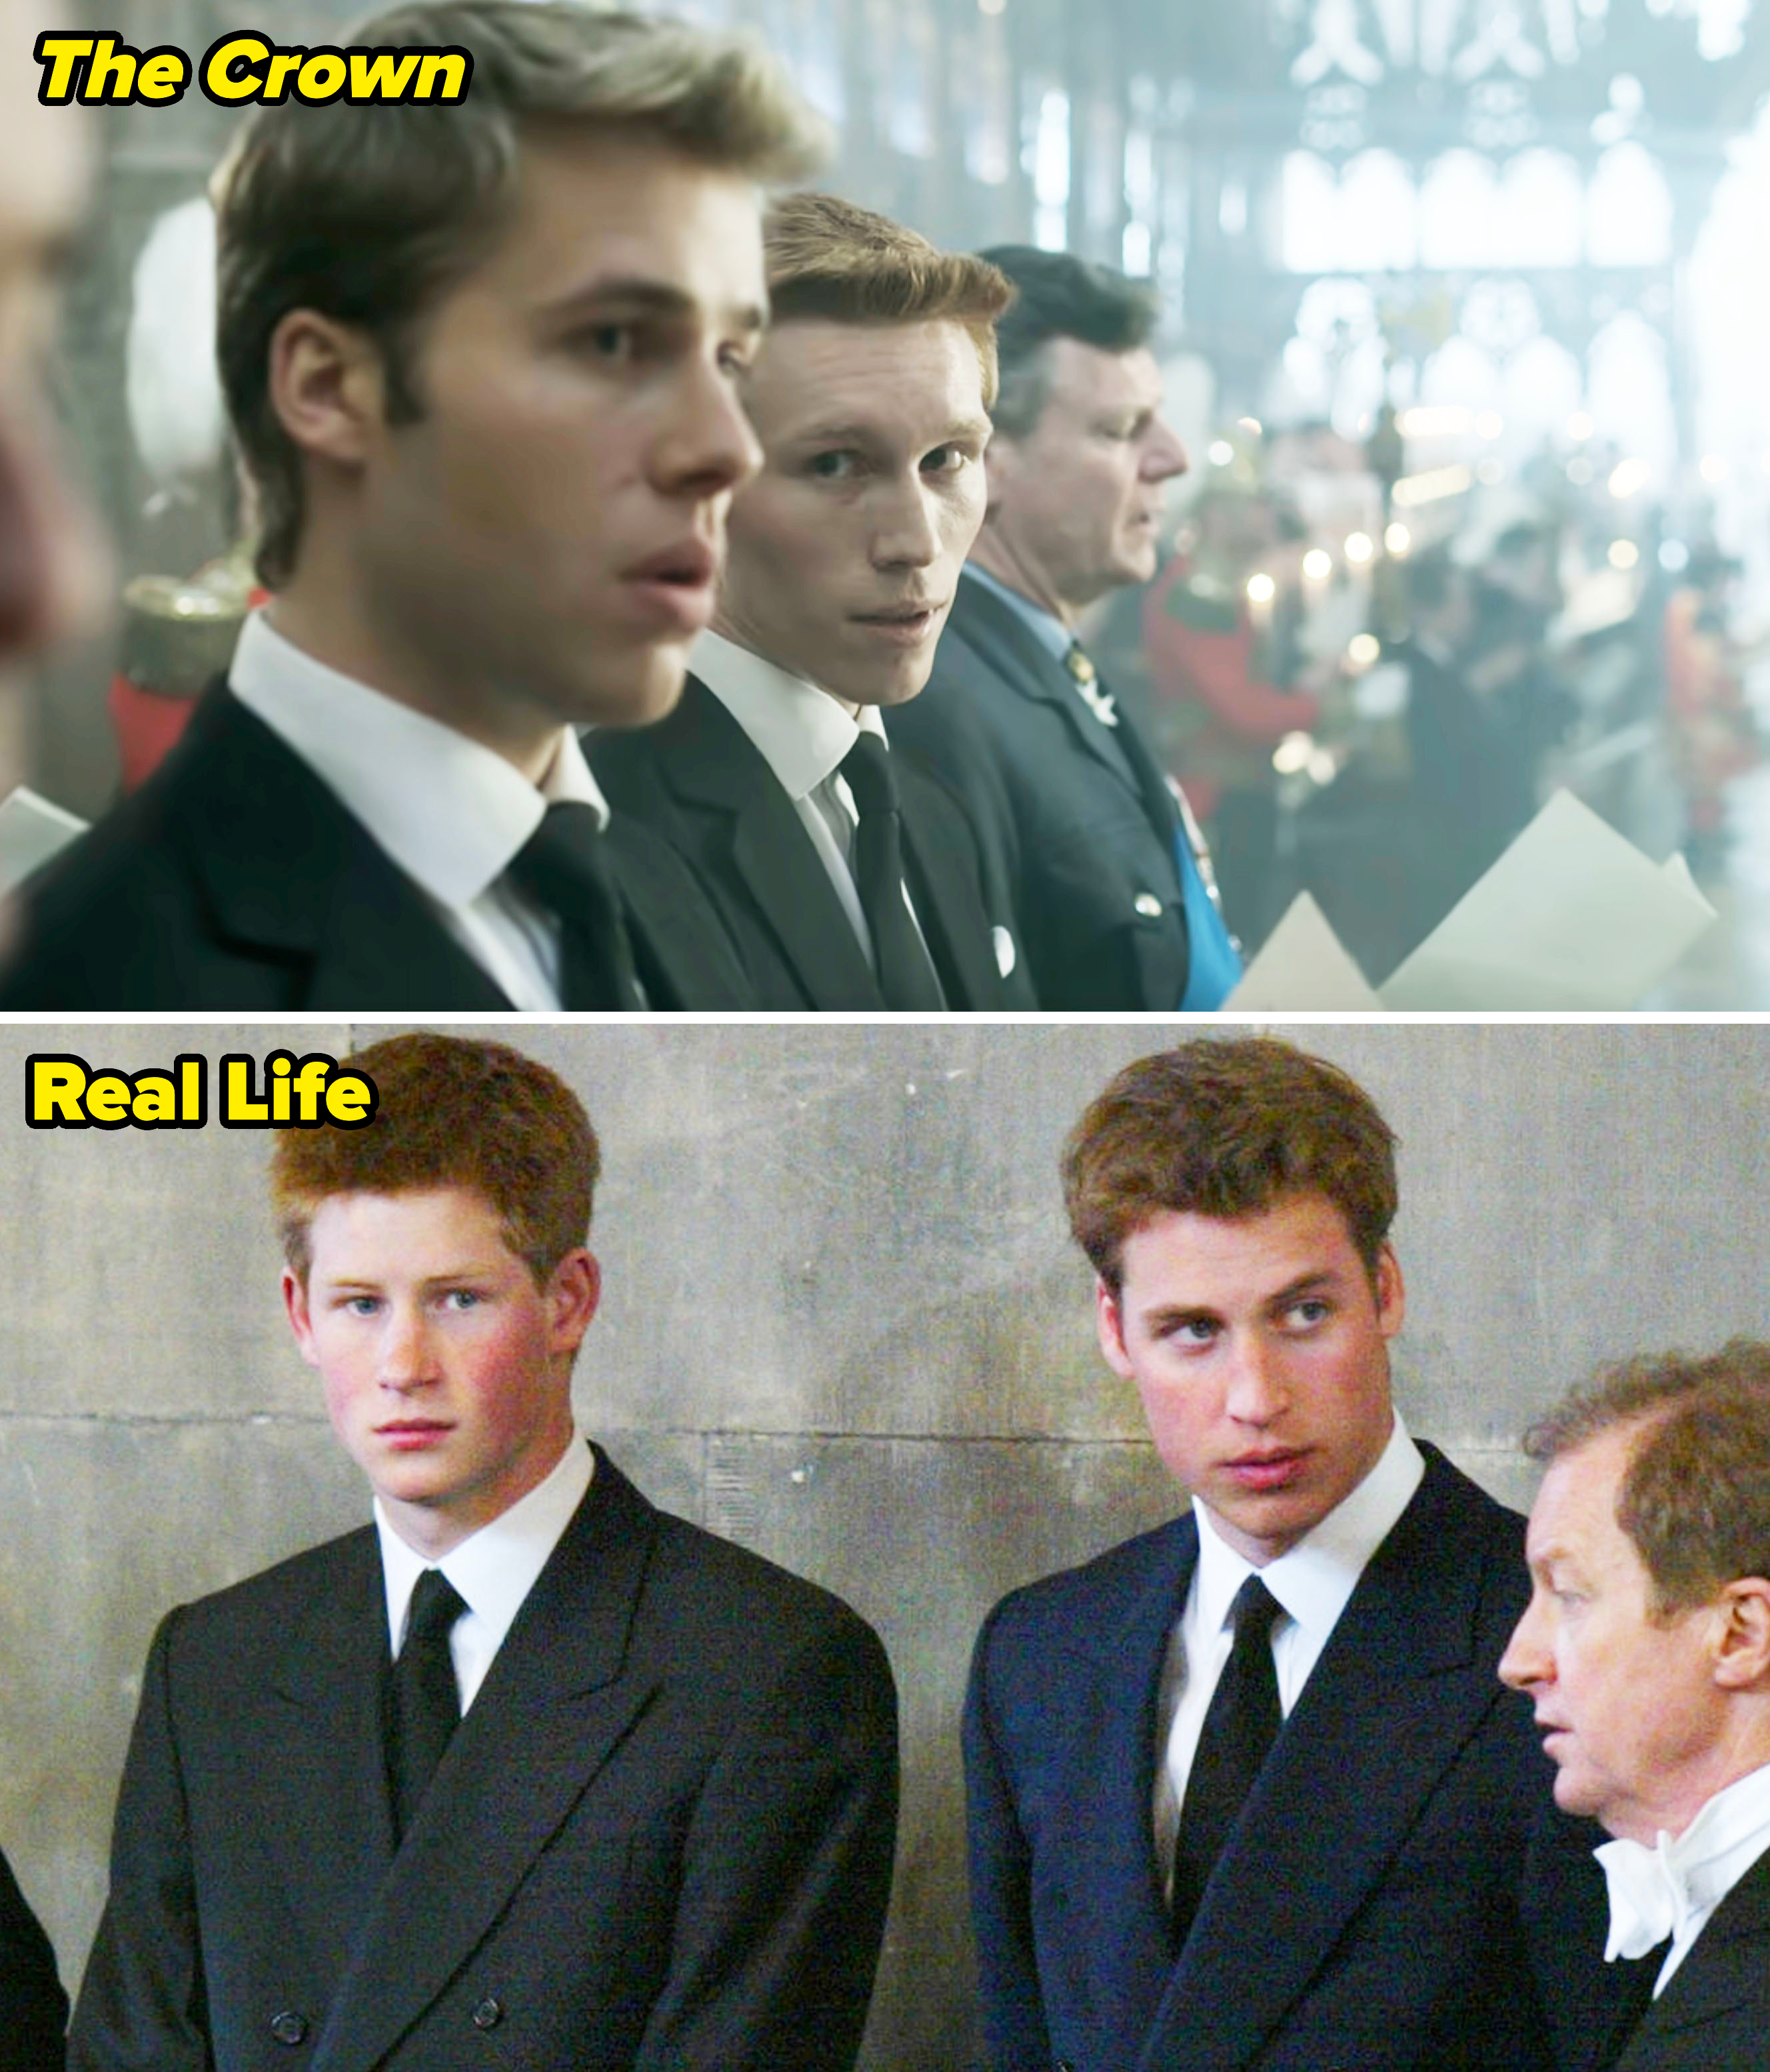 Princess Harry and William in real life vs. &quot;The Crown&quot;